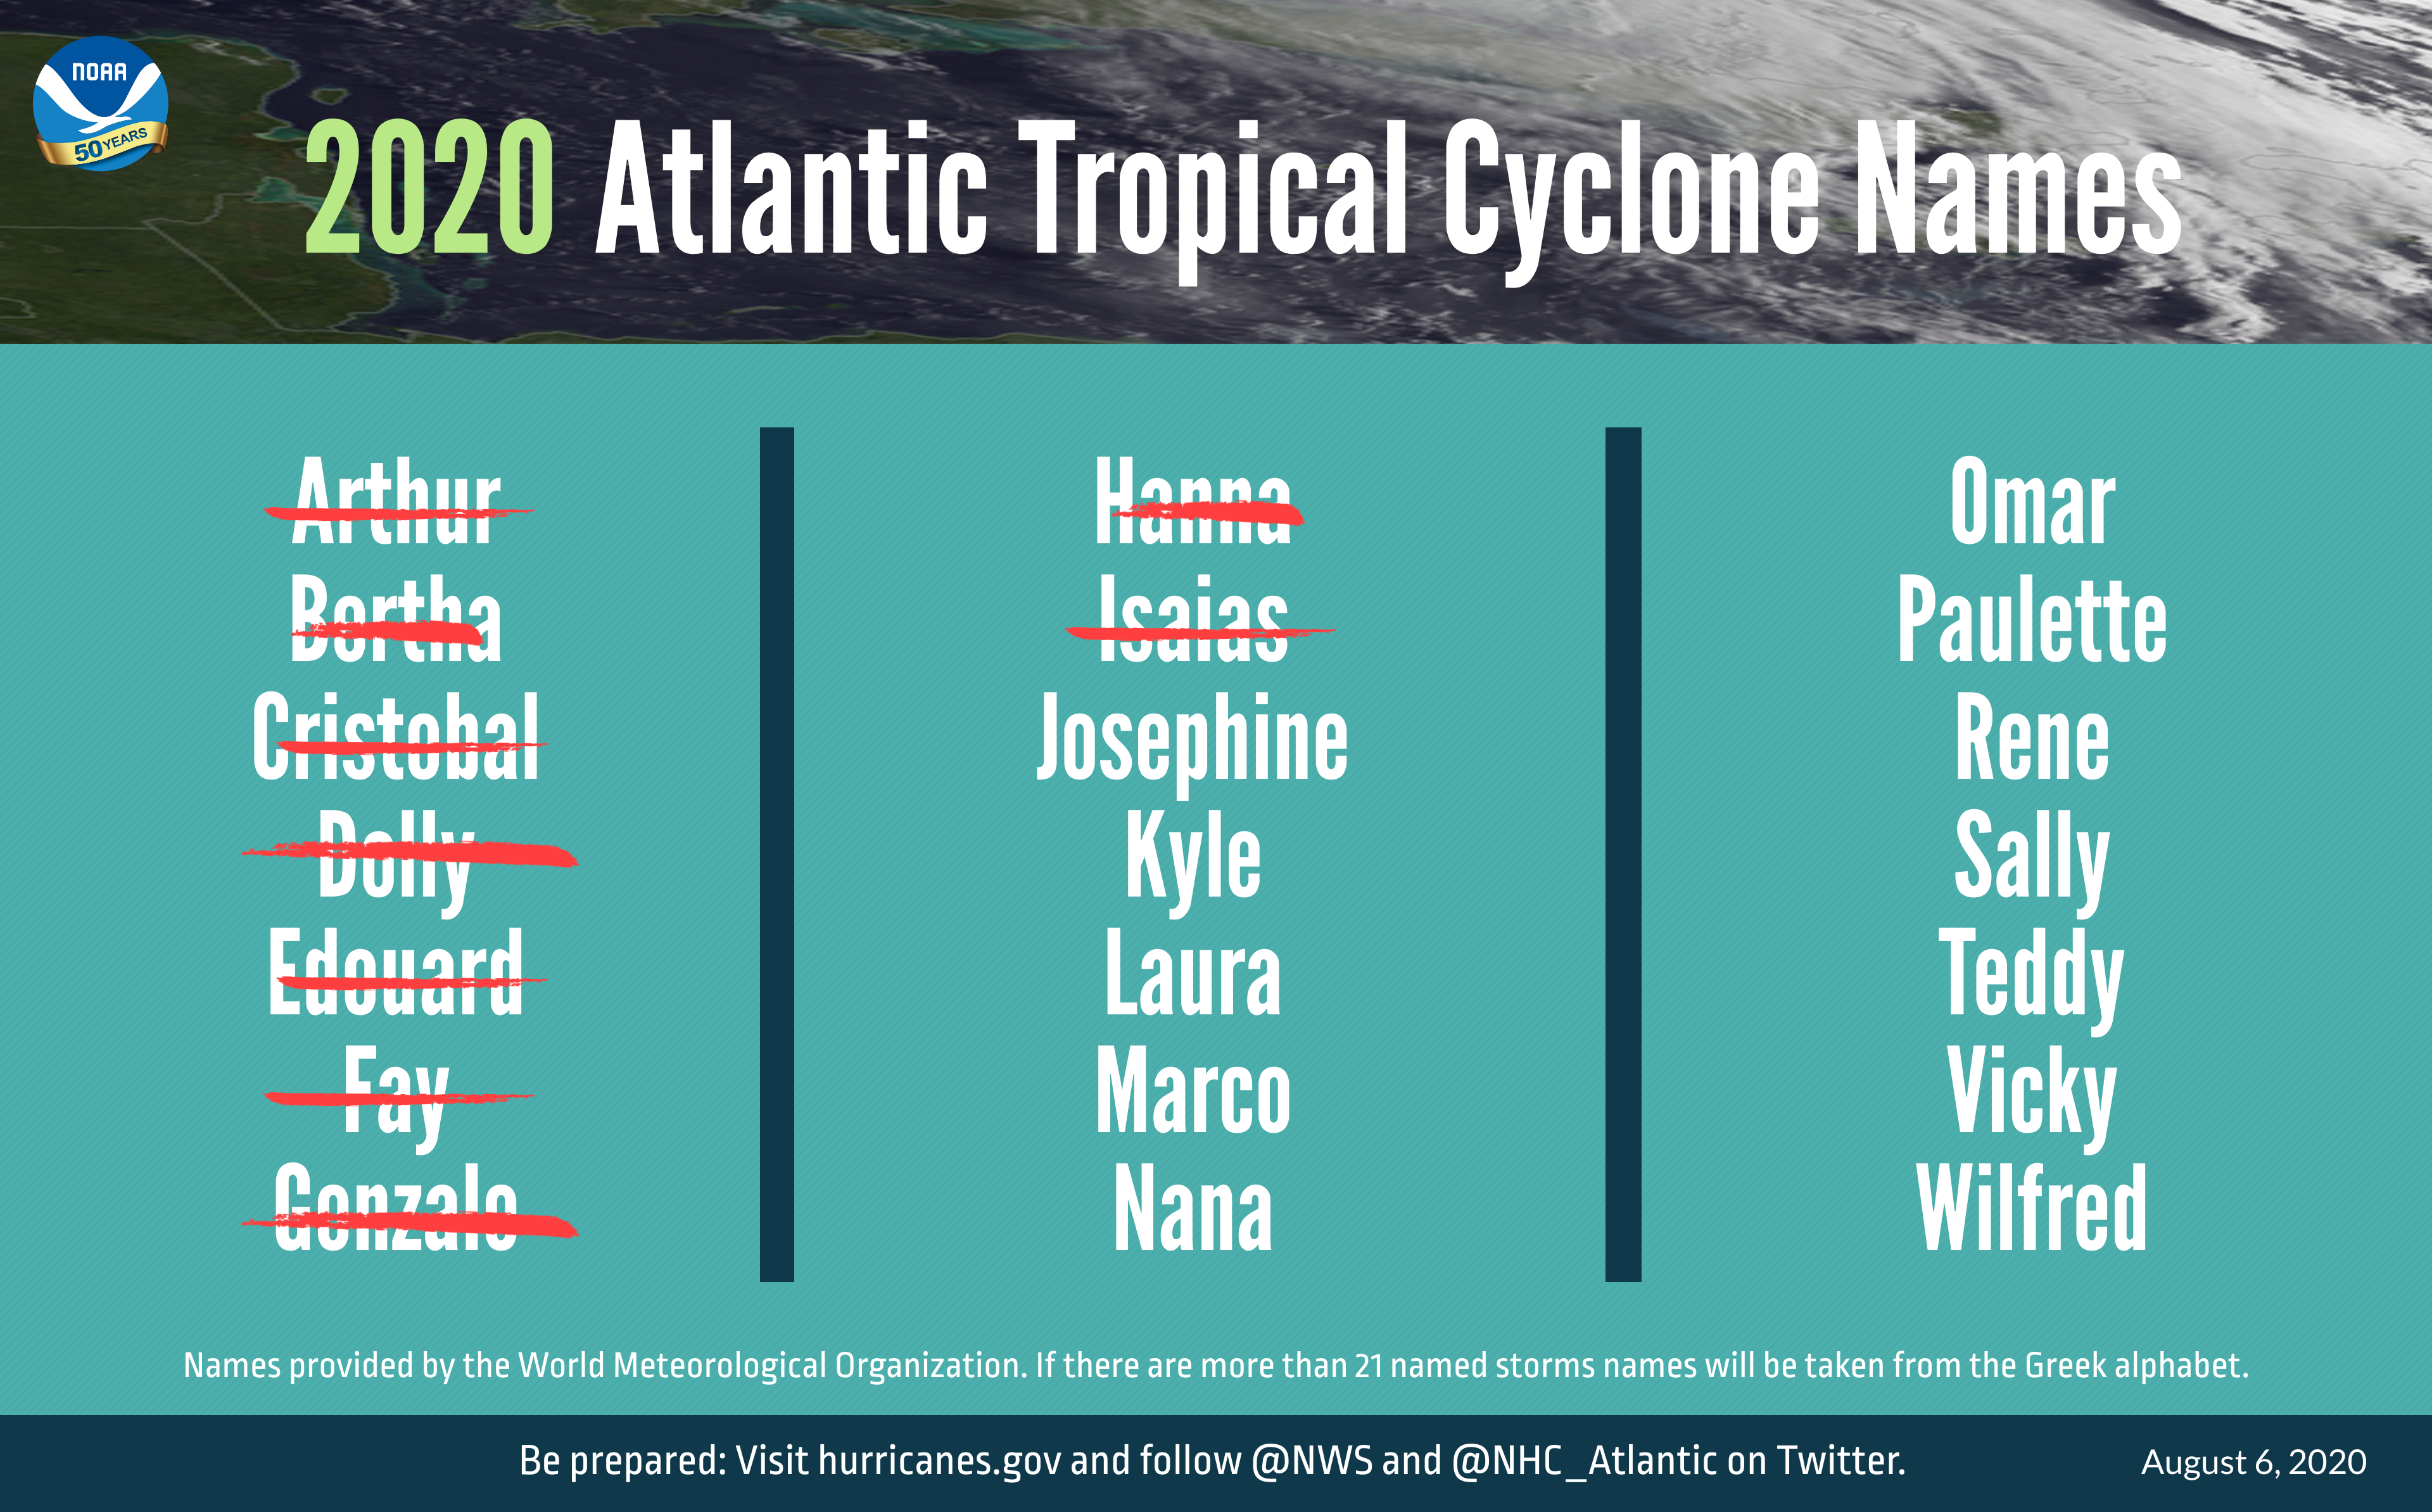 The 2020 Atlantic tropical cyclone names selected by the World Meteorological Organization.